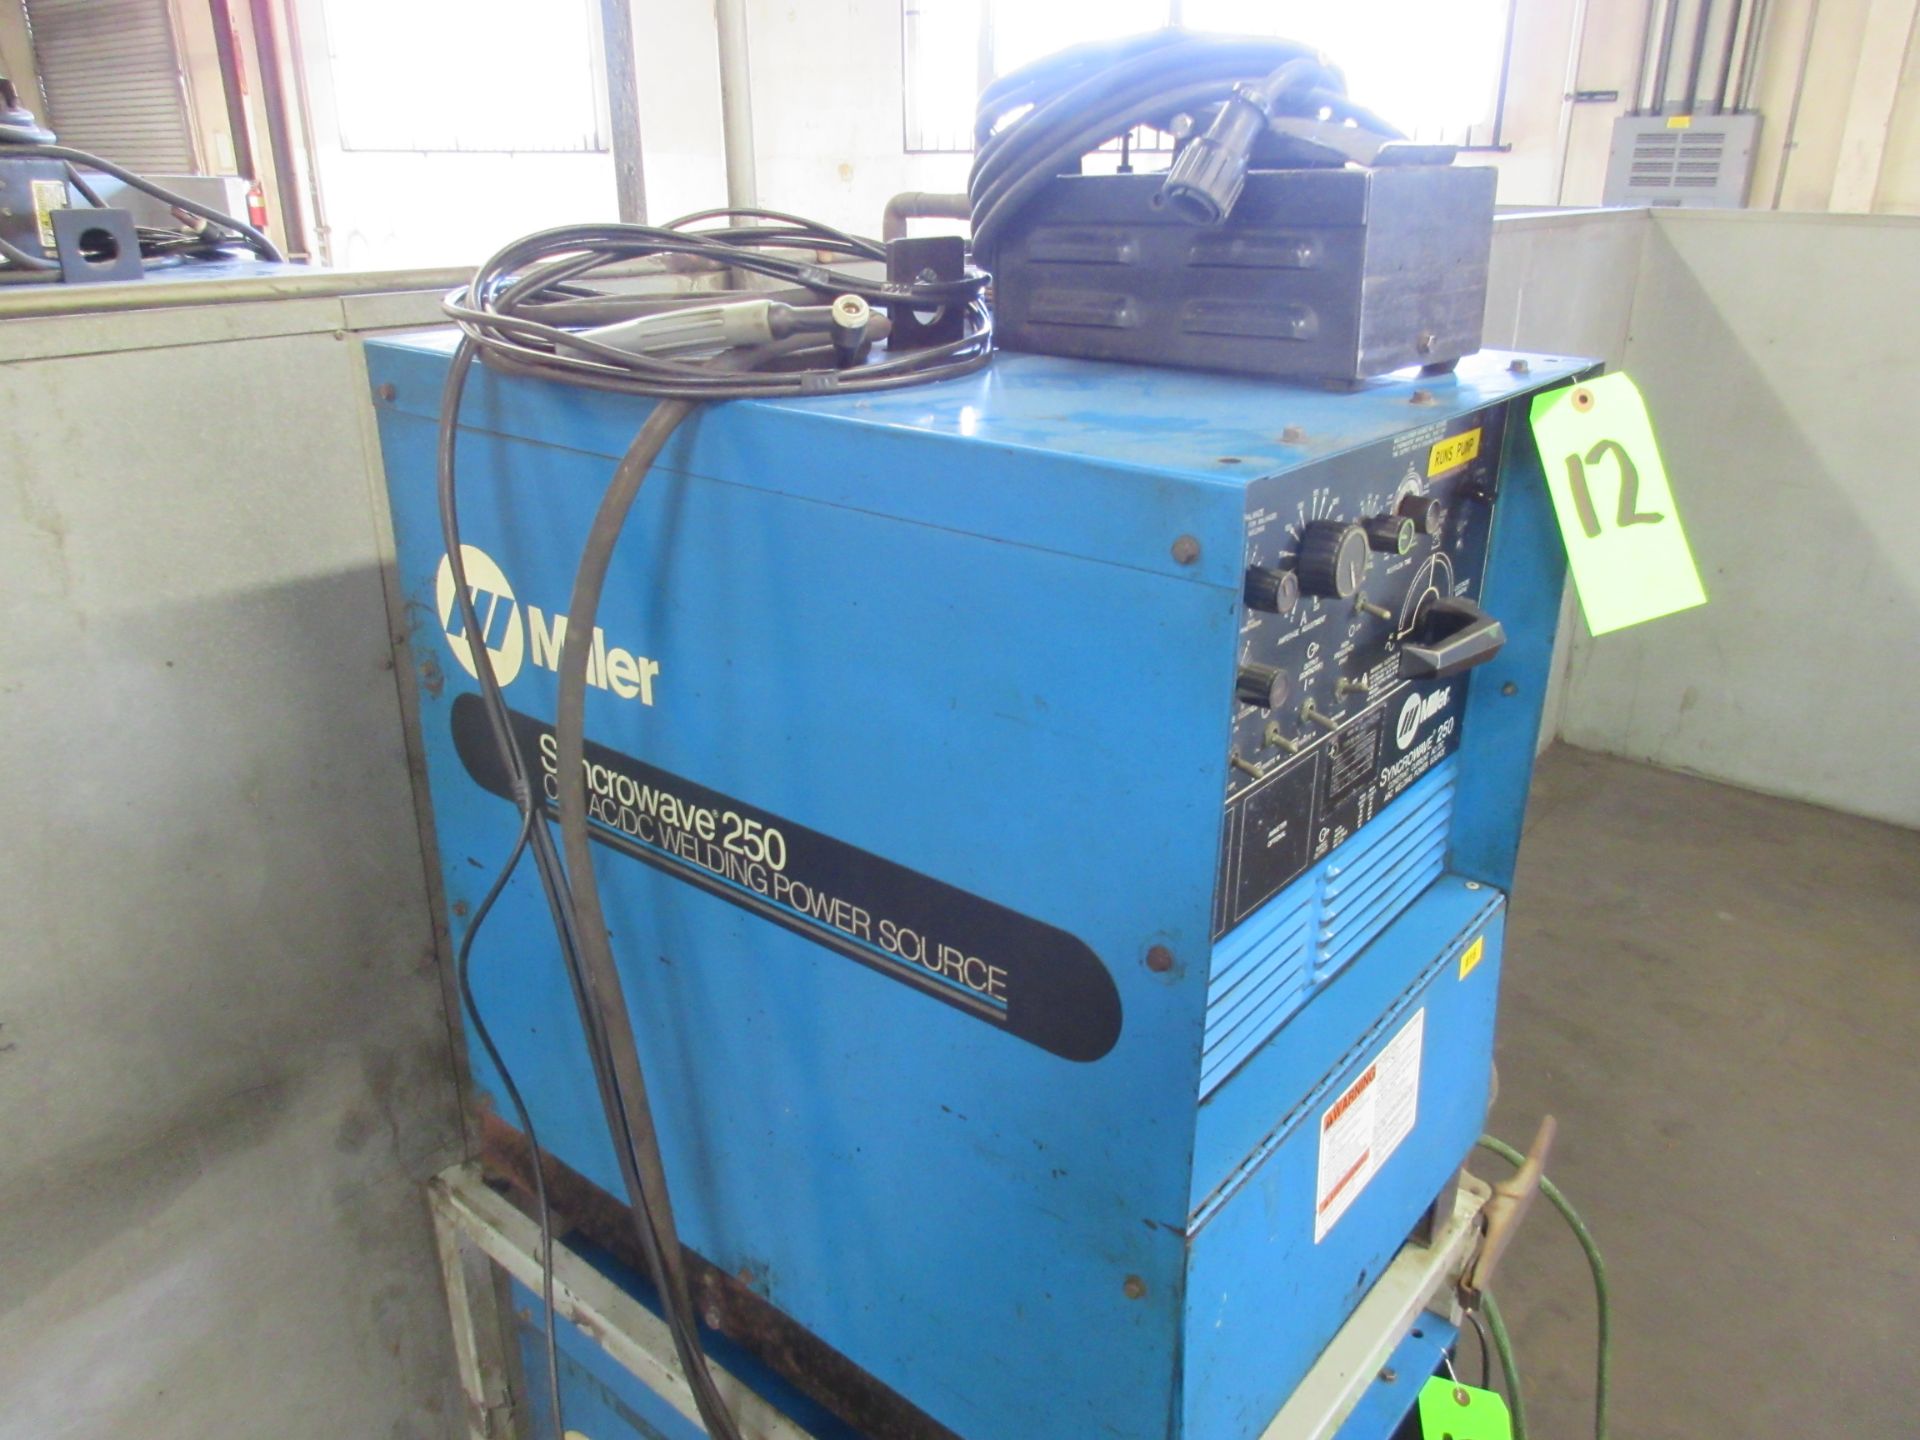 MILLER SYNCROWAVE 250 CONSTANT CURRENT AC/DC ARC WELDER W/ FOOT CONTROL - Image 2 of 3